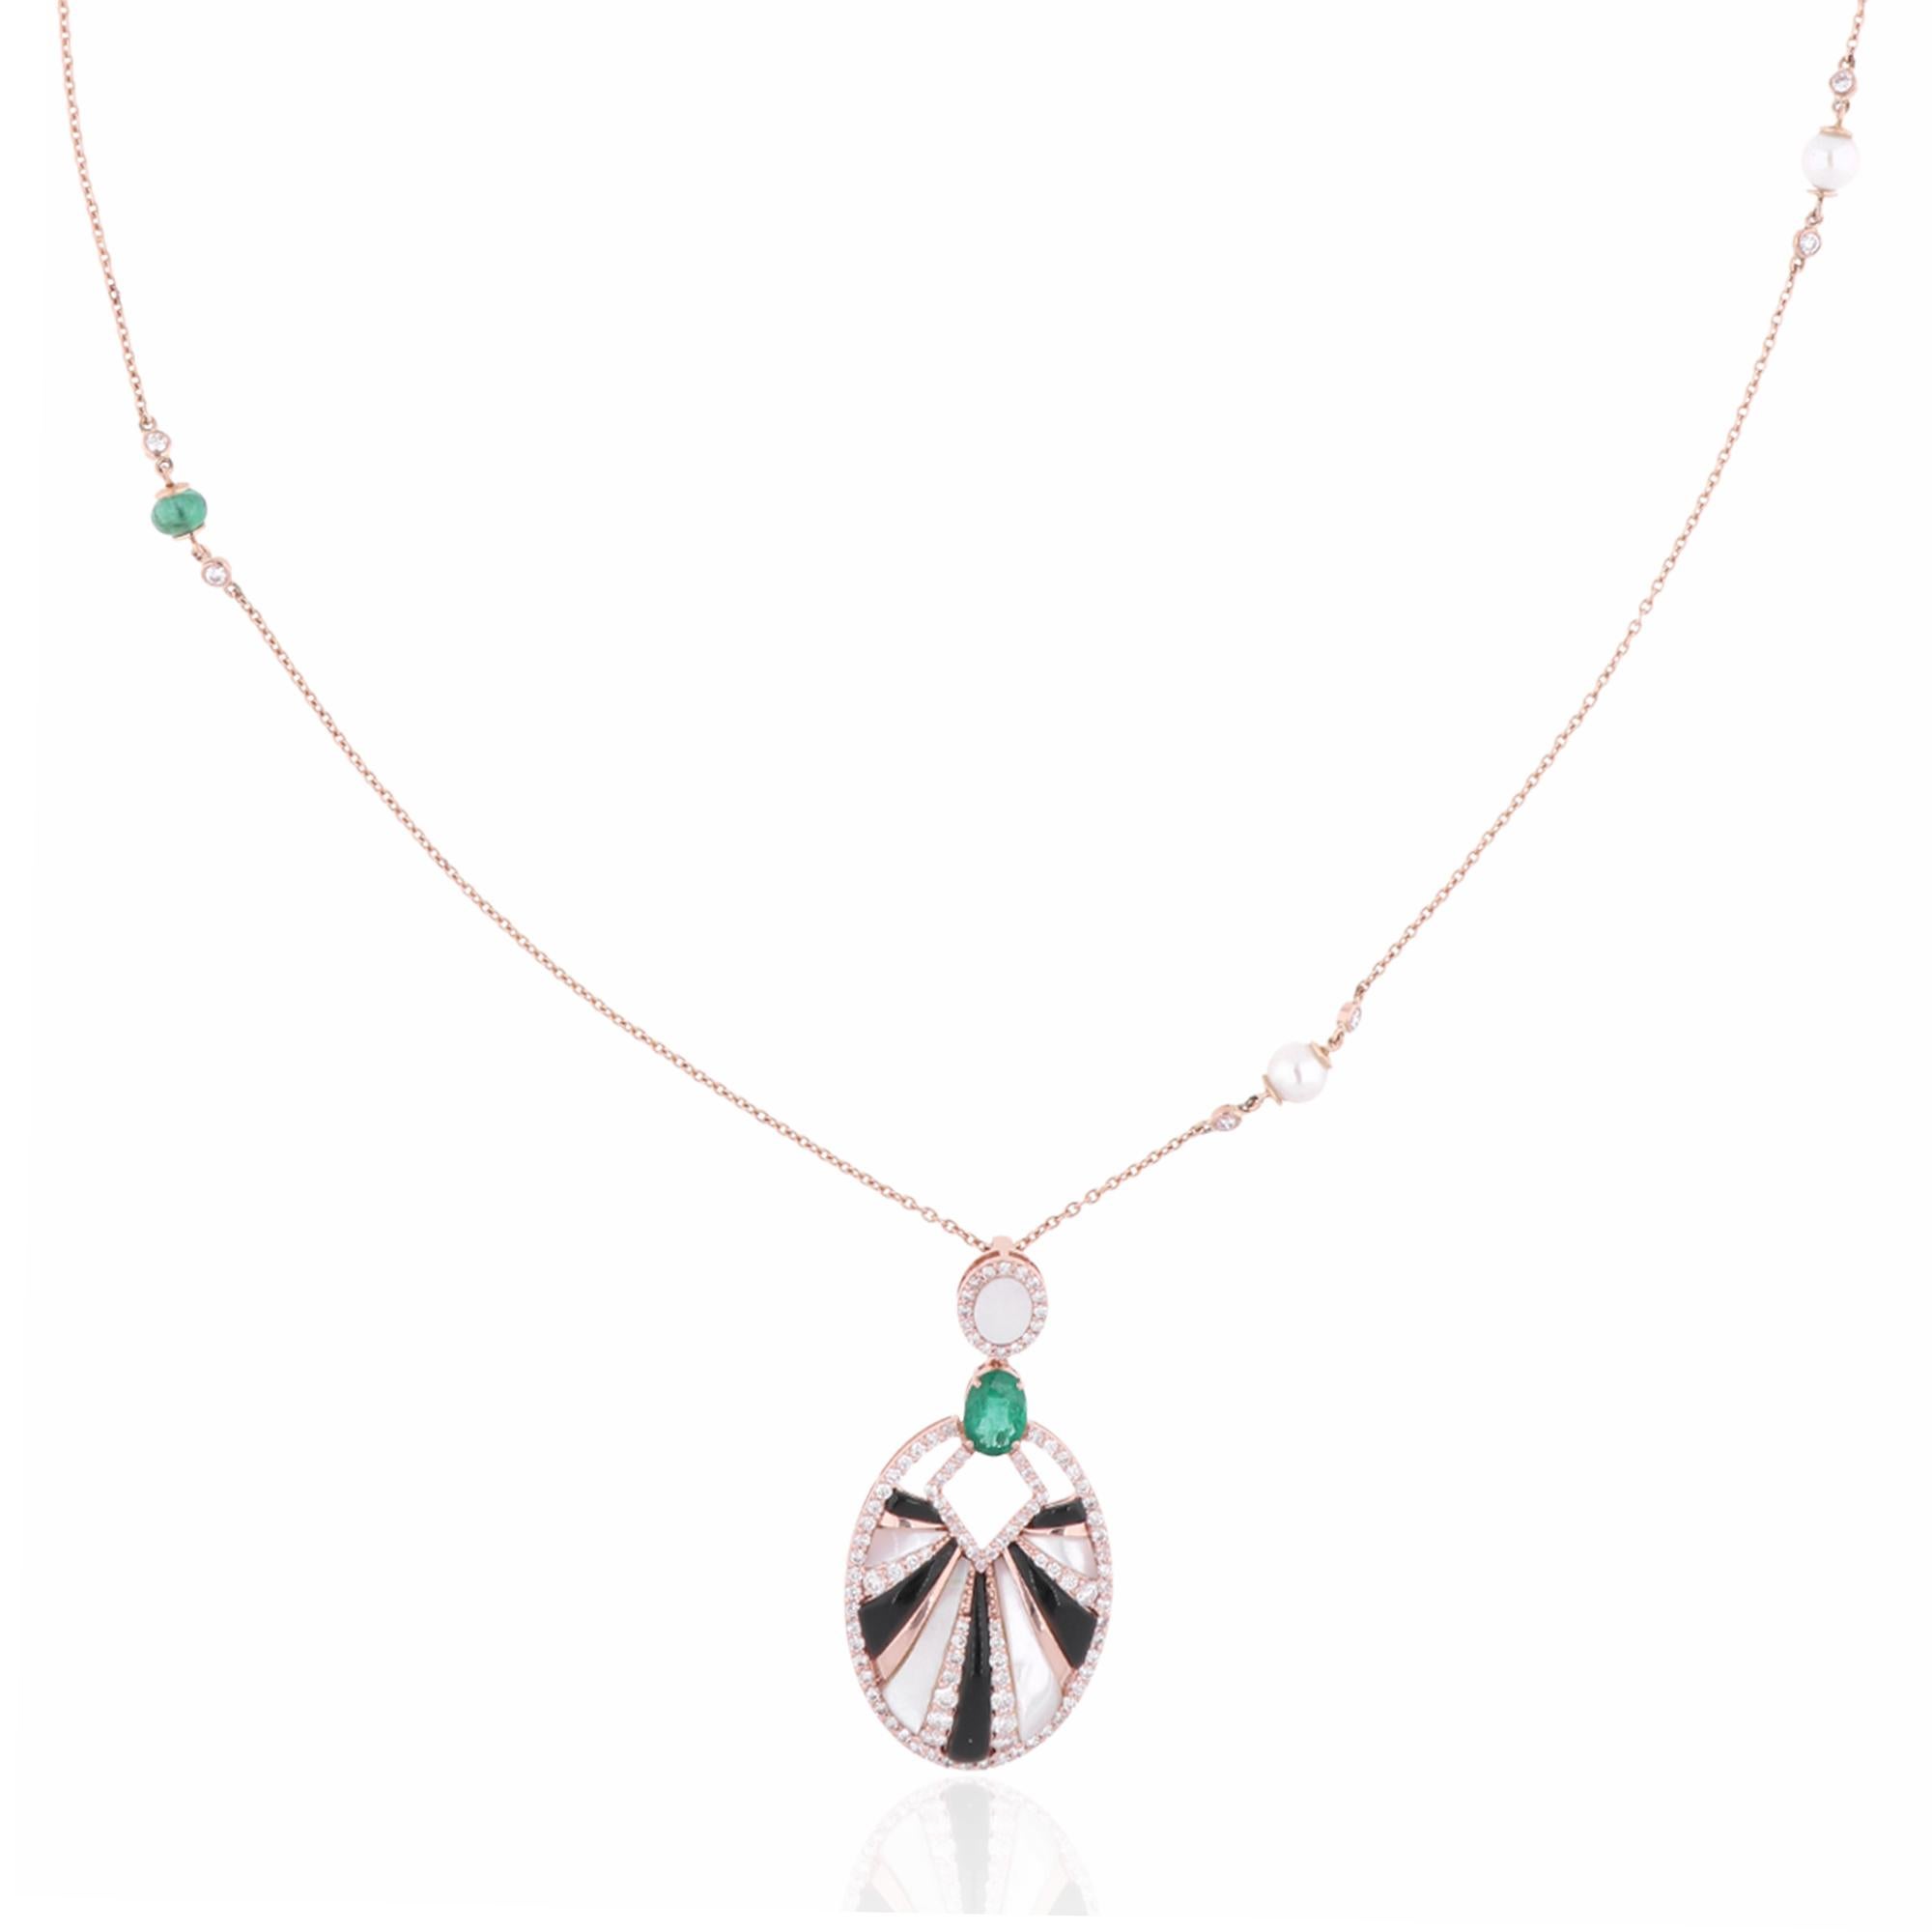 Step into a world of unparalleled luxury and elegance with our Real Emerald Mother of Pearl Gemstone Pendant Diamond Necklace, a true masterpiece crafted to captivate and enchant. Delicately suspended from a shimmering 18k Rose Gold chain, this